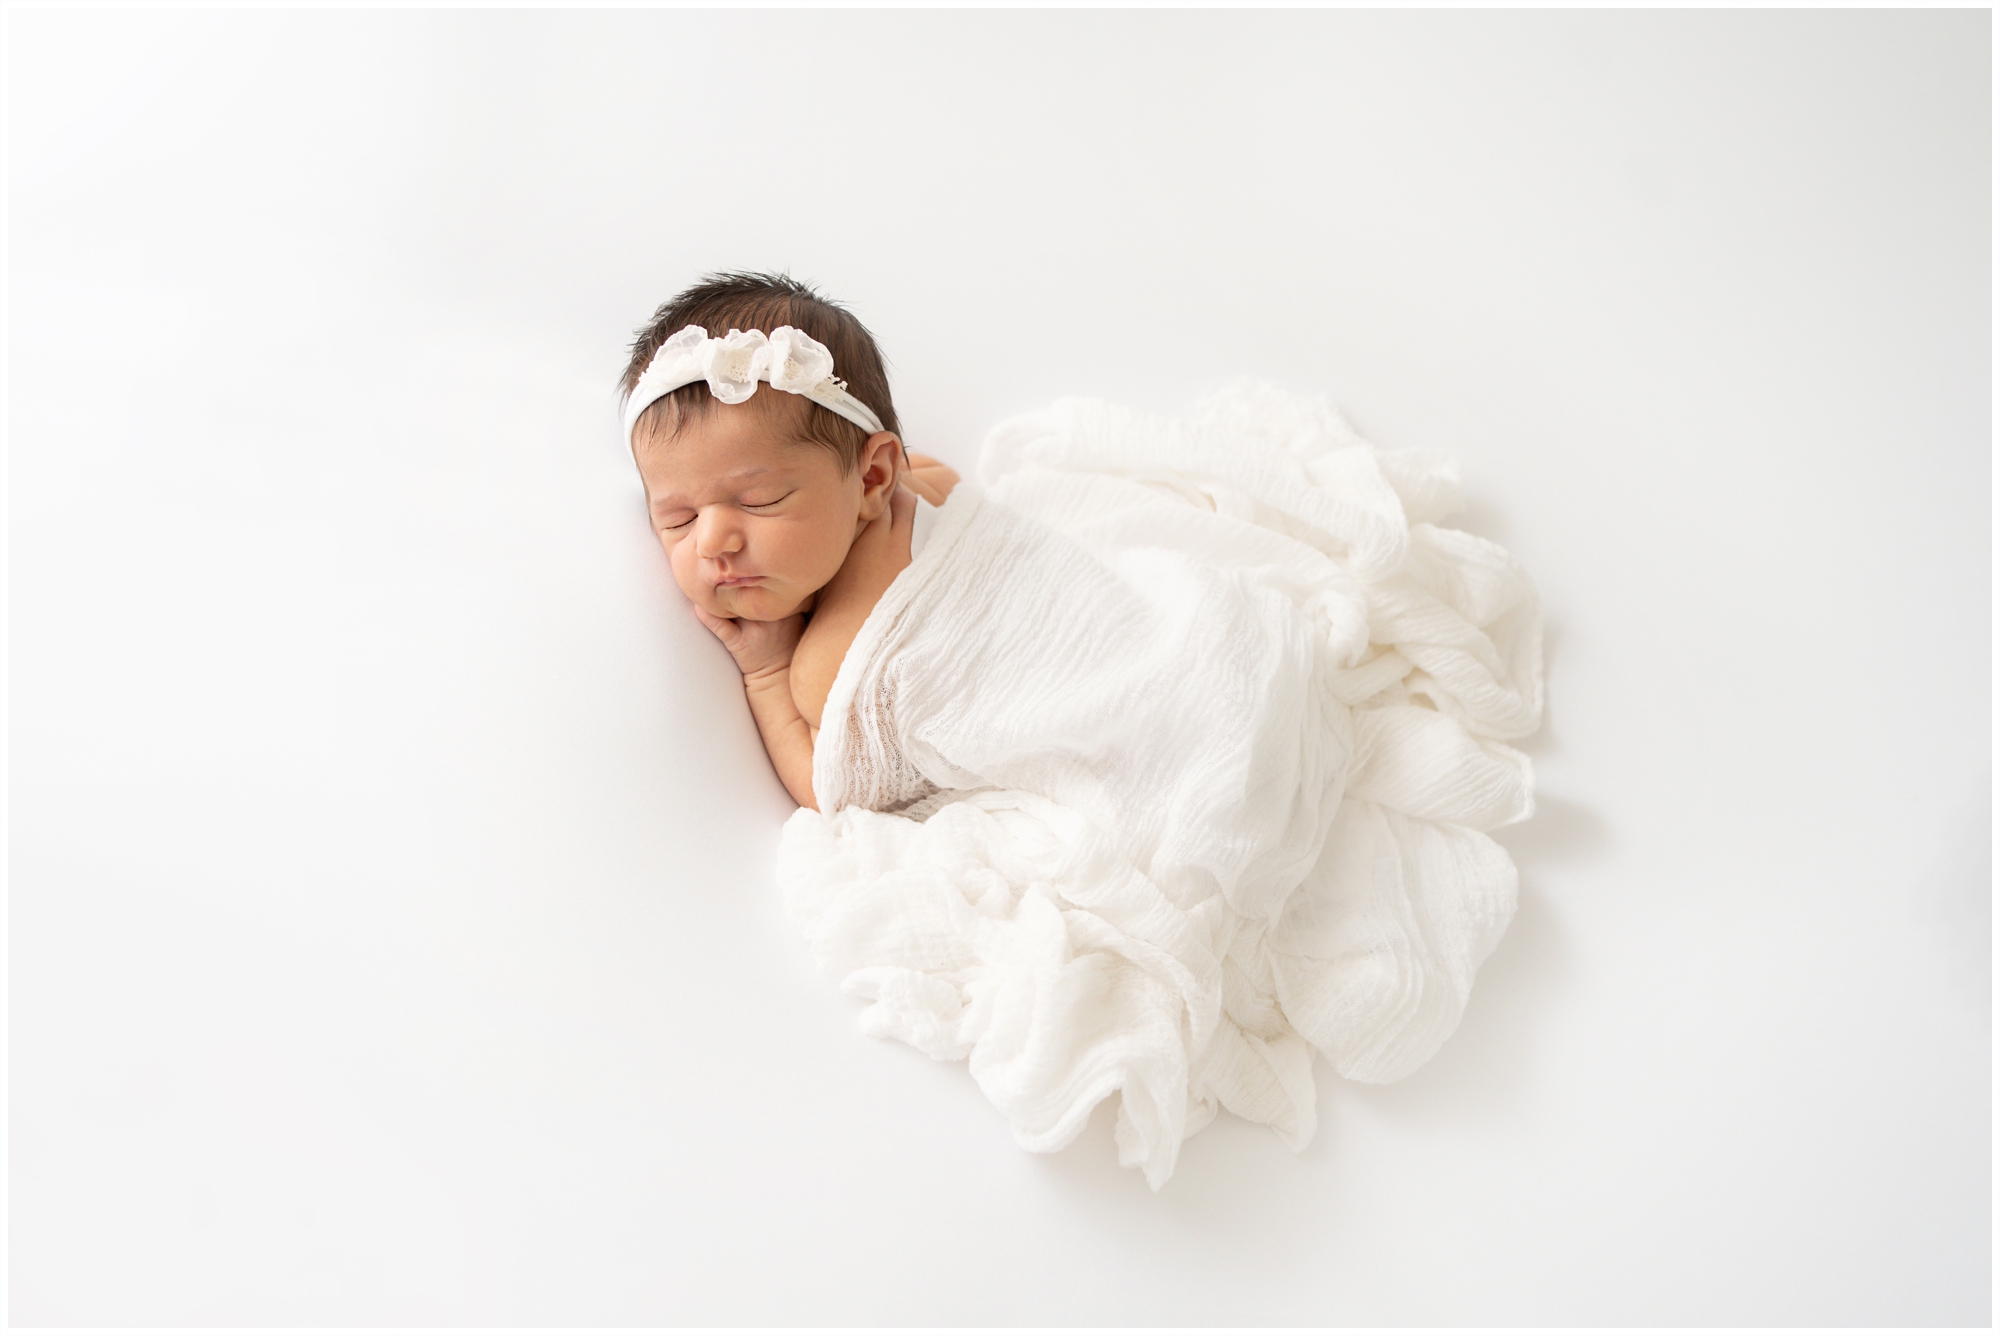 Brand new baby swaddled on white blanket being photographed in Jupiter Fl studio